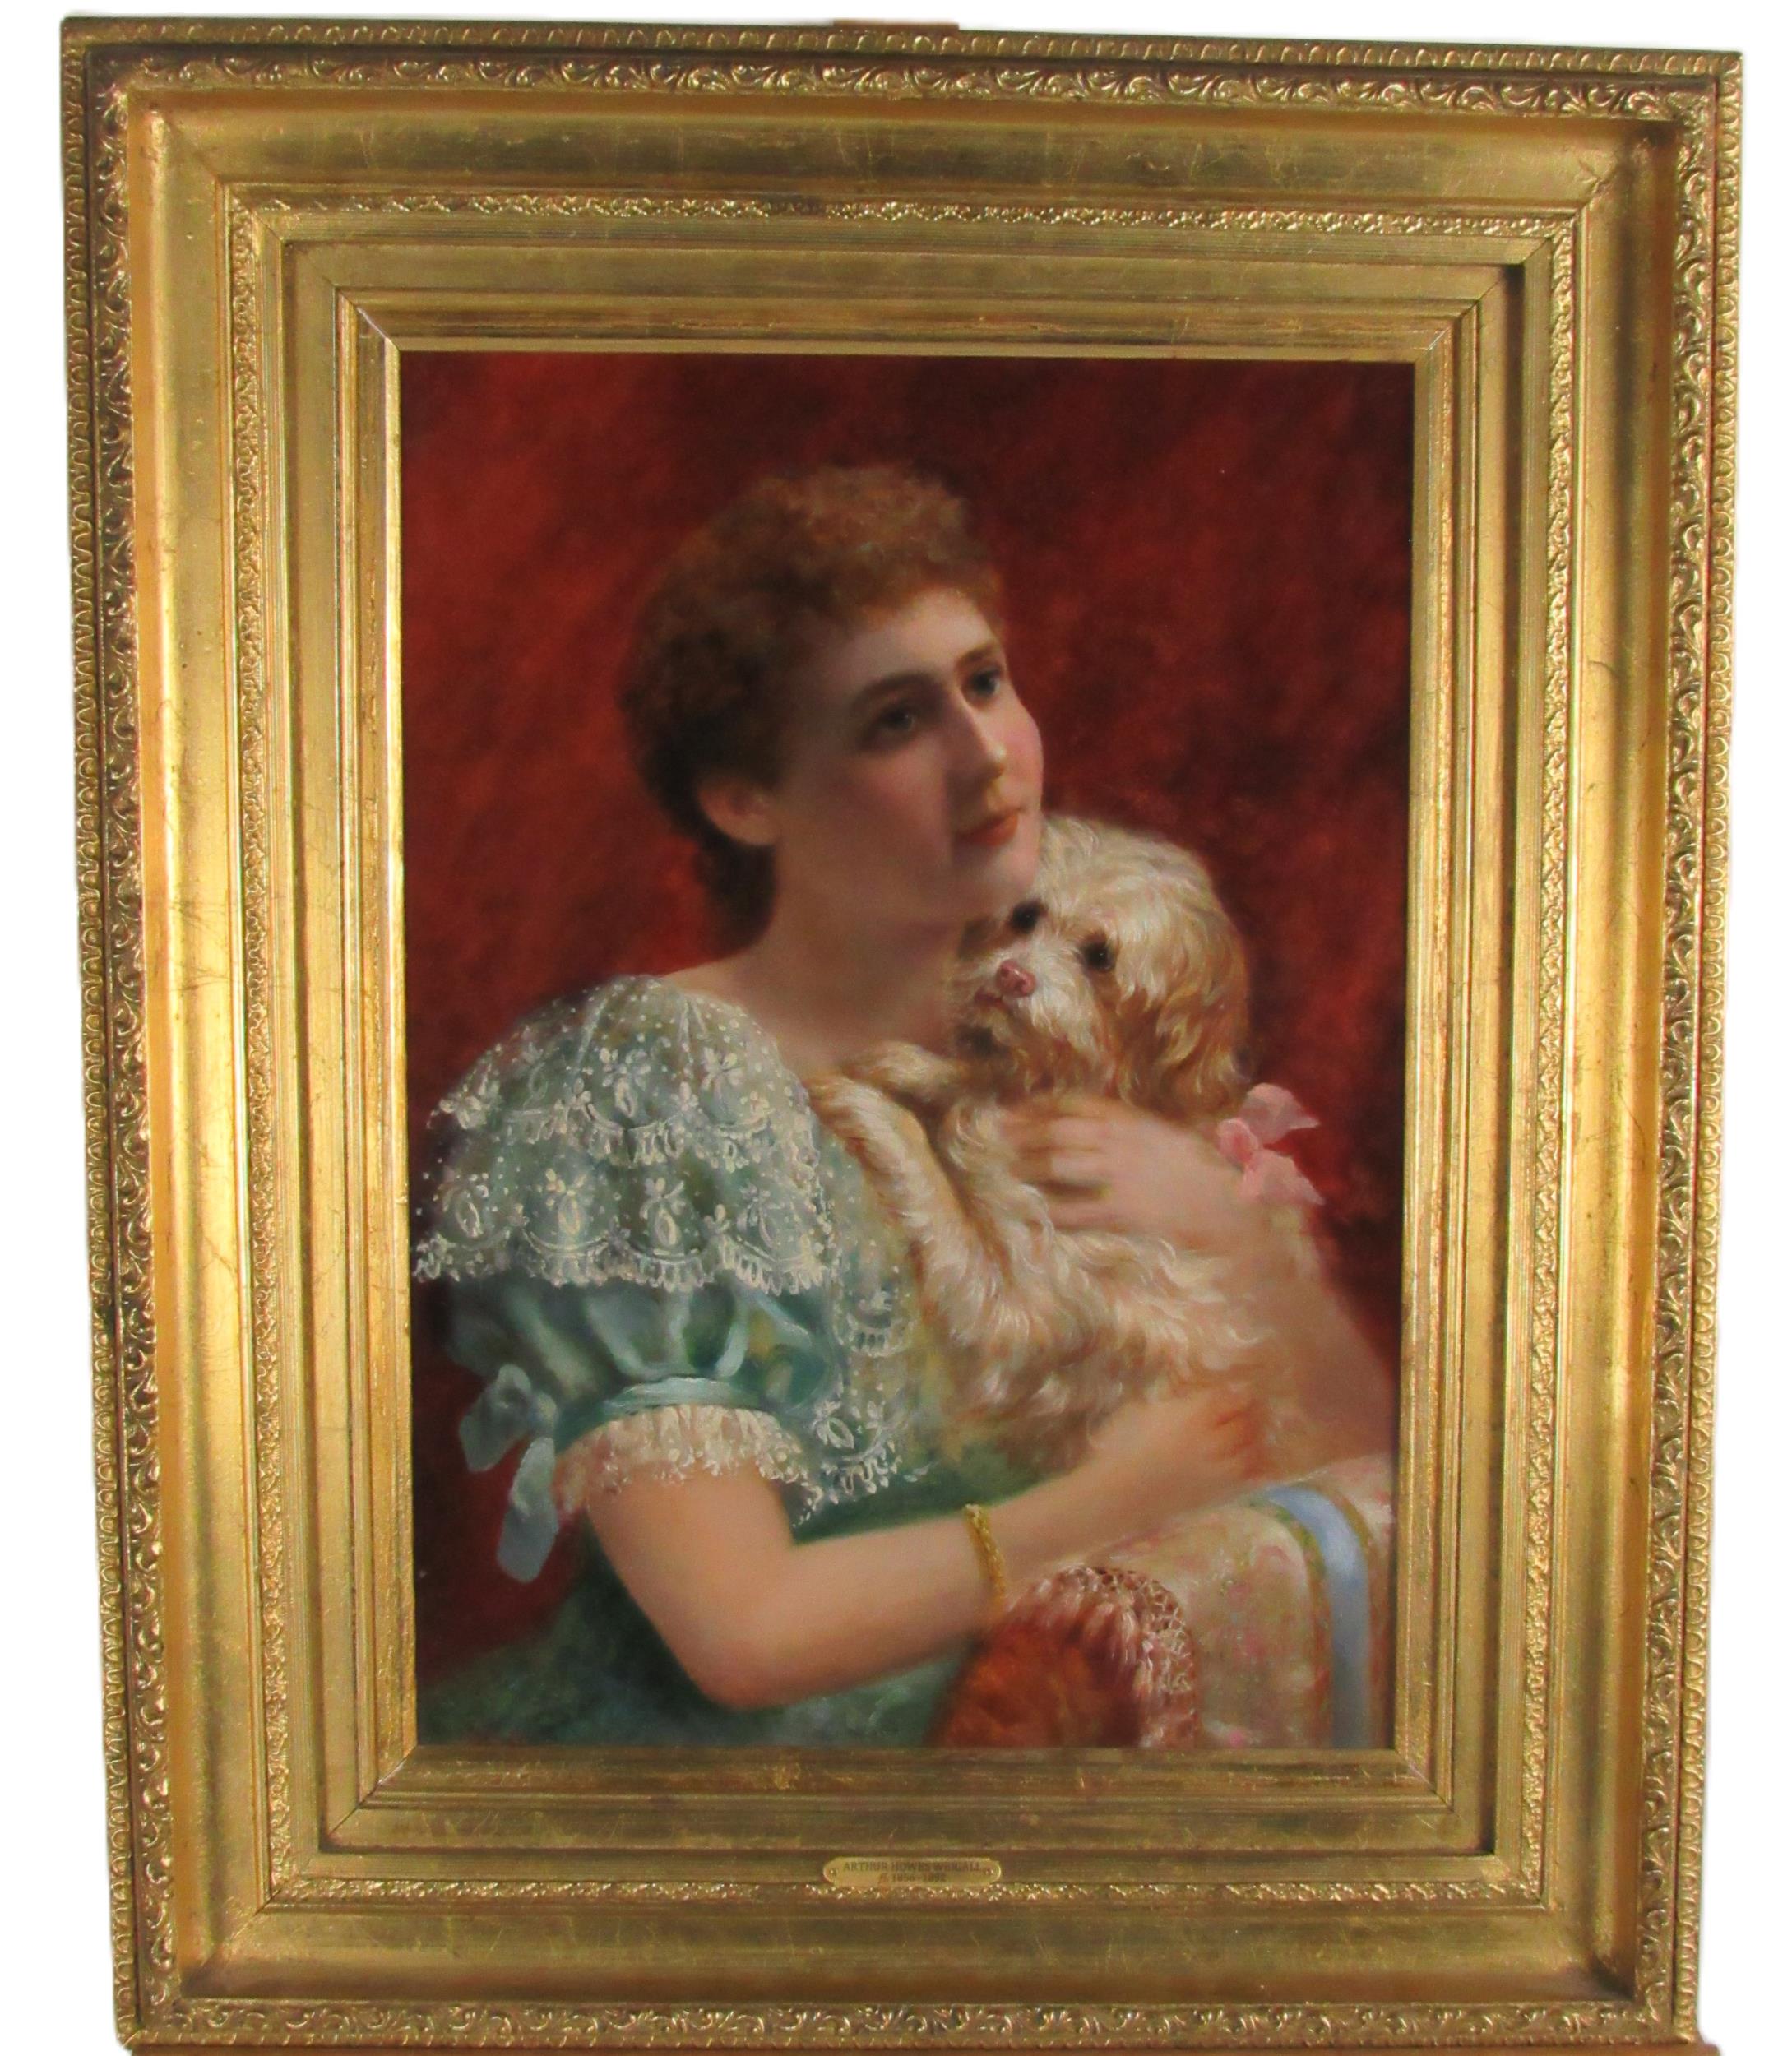 Arthur Hower Weigall, British (c. 1856-1892) "Young Girl and Dog," oils on bord, approx. 43cms x